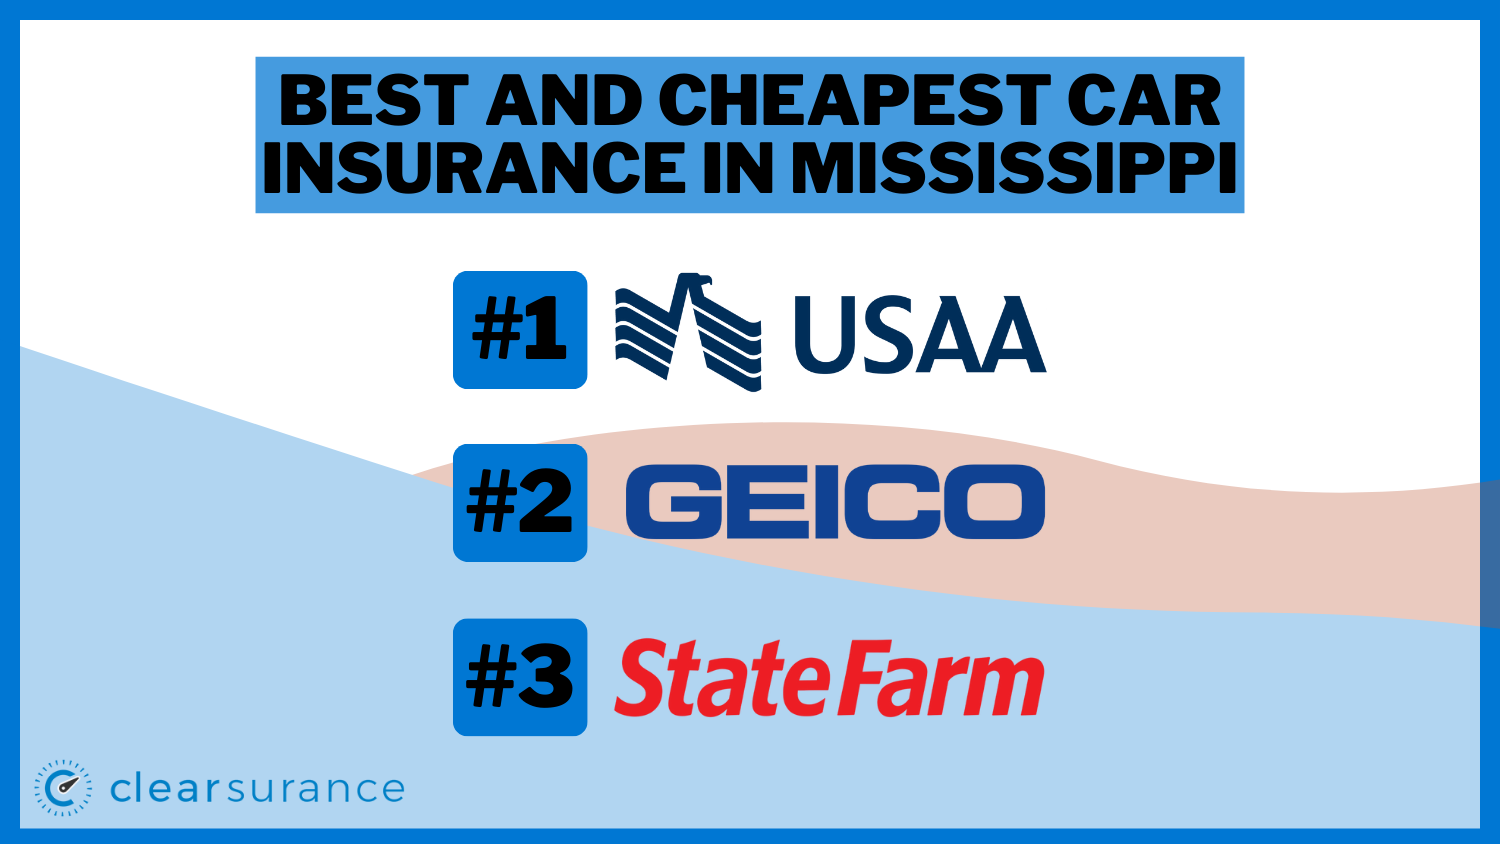 Best and Cheapest Car Insurance in Mississippi: USAA, Geico, State Farm